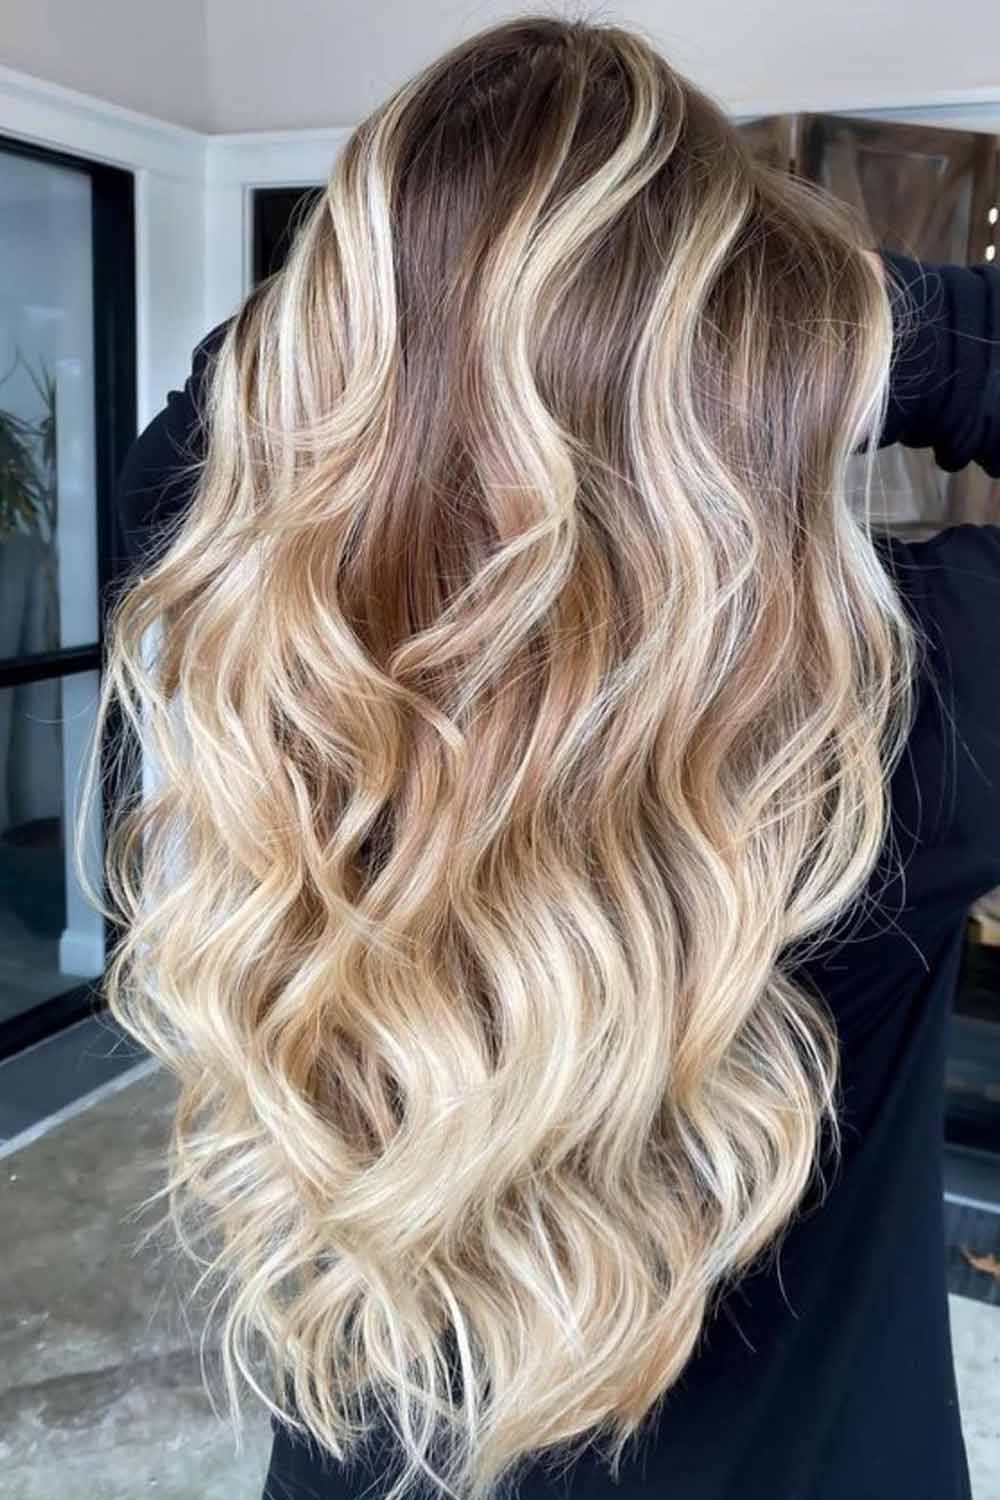 Long Wavy Brown and Blonde Hair